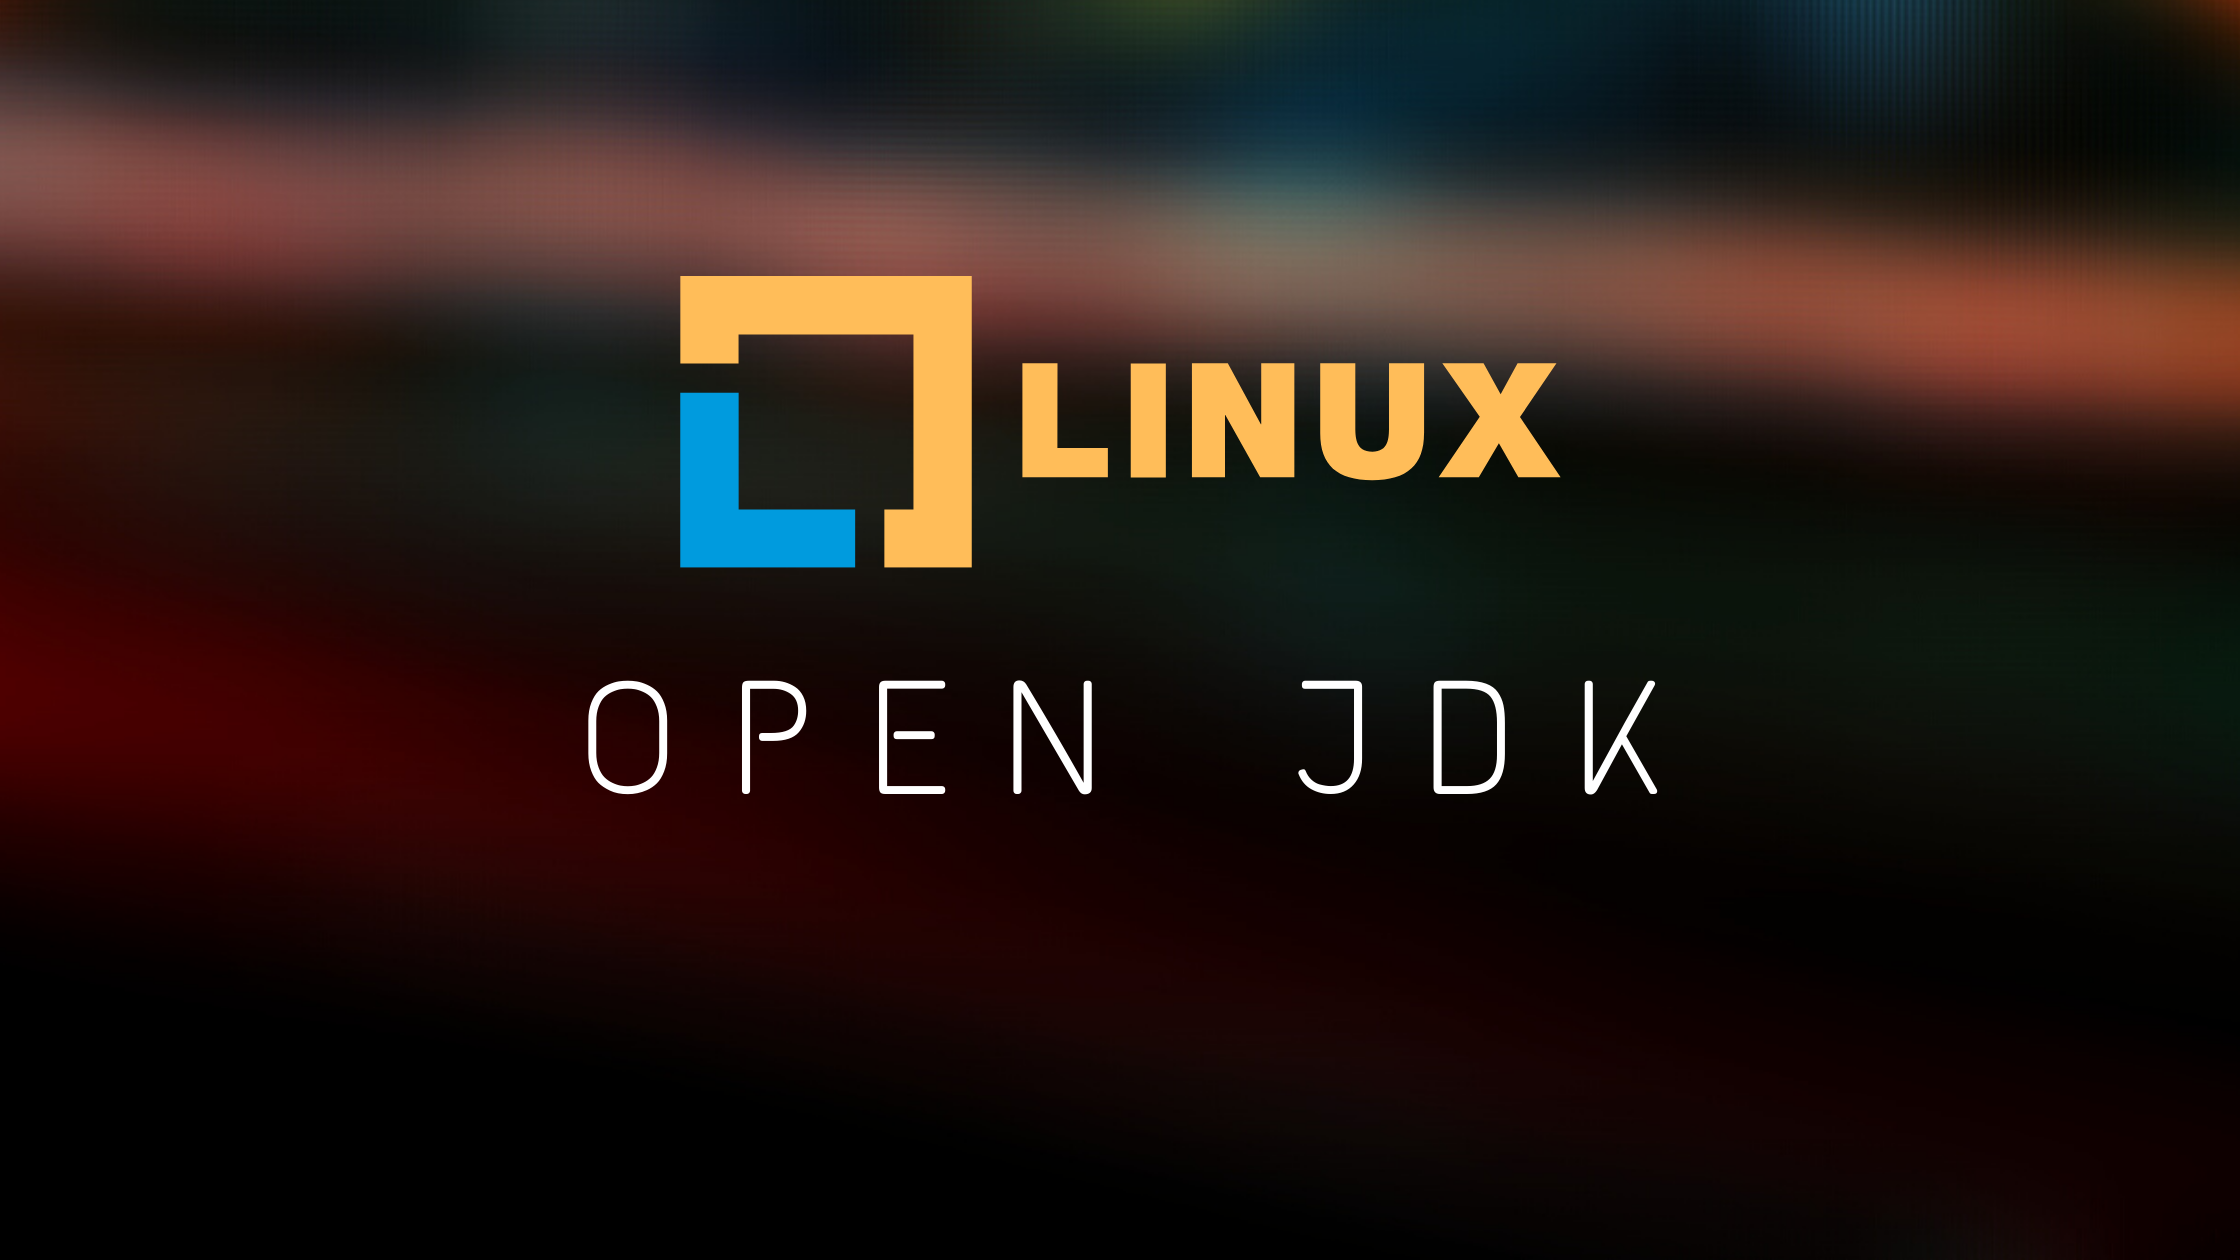 OpenJDK or Java on Linux